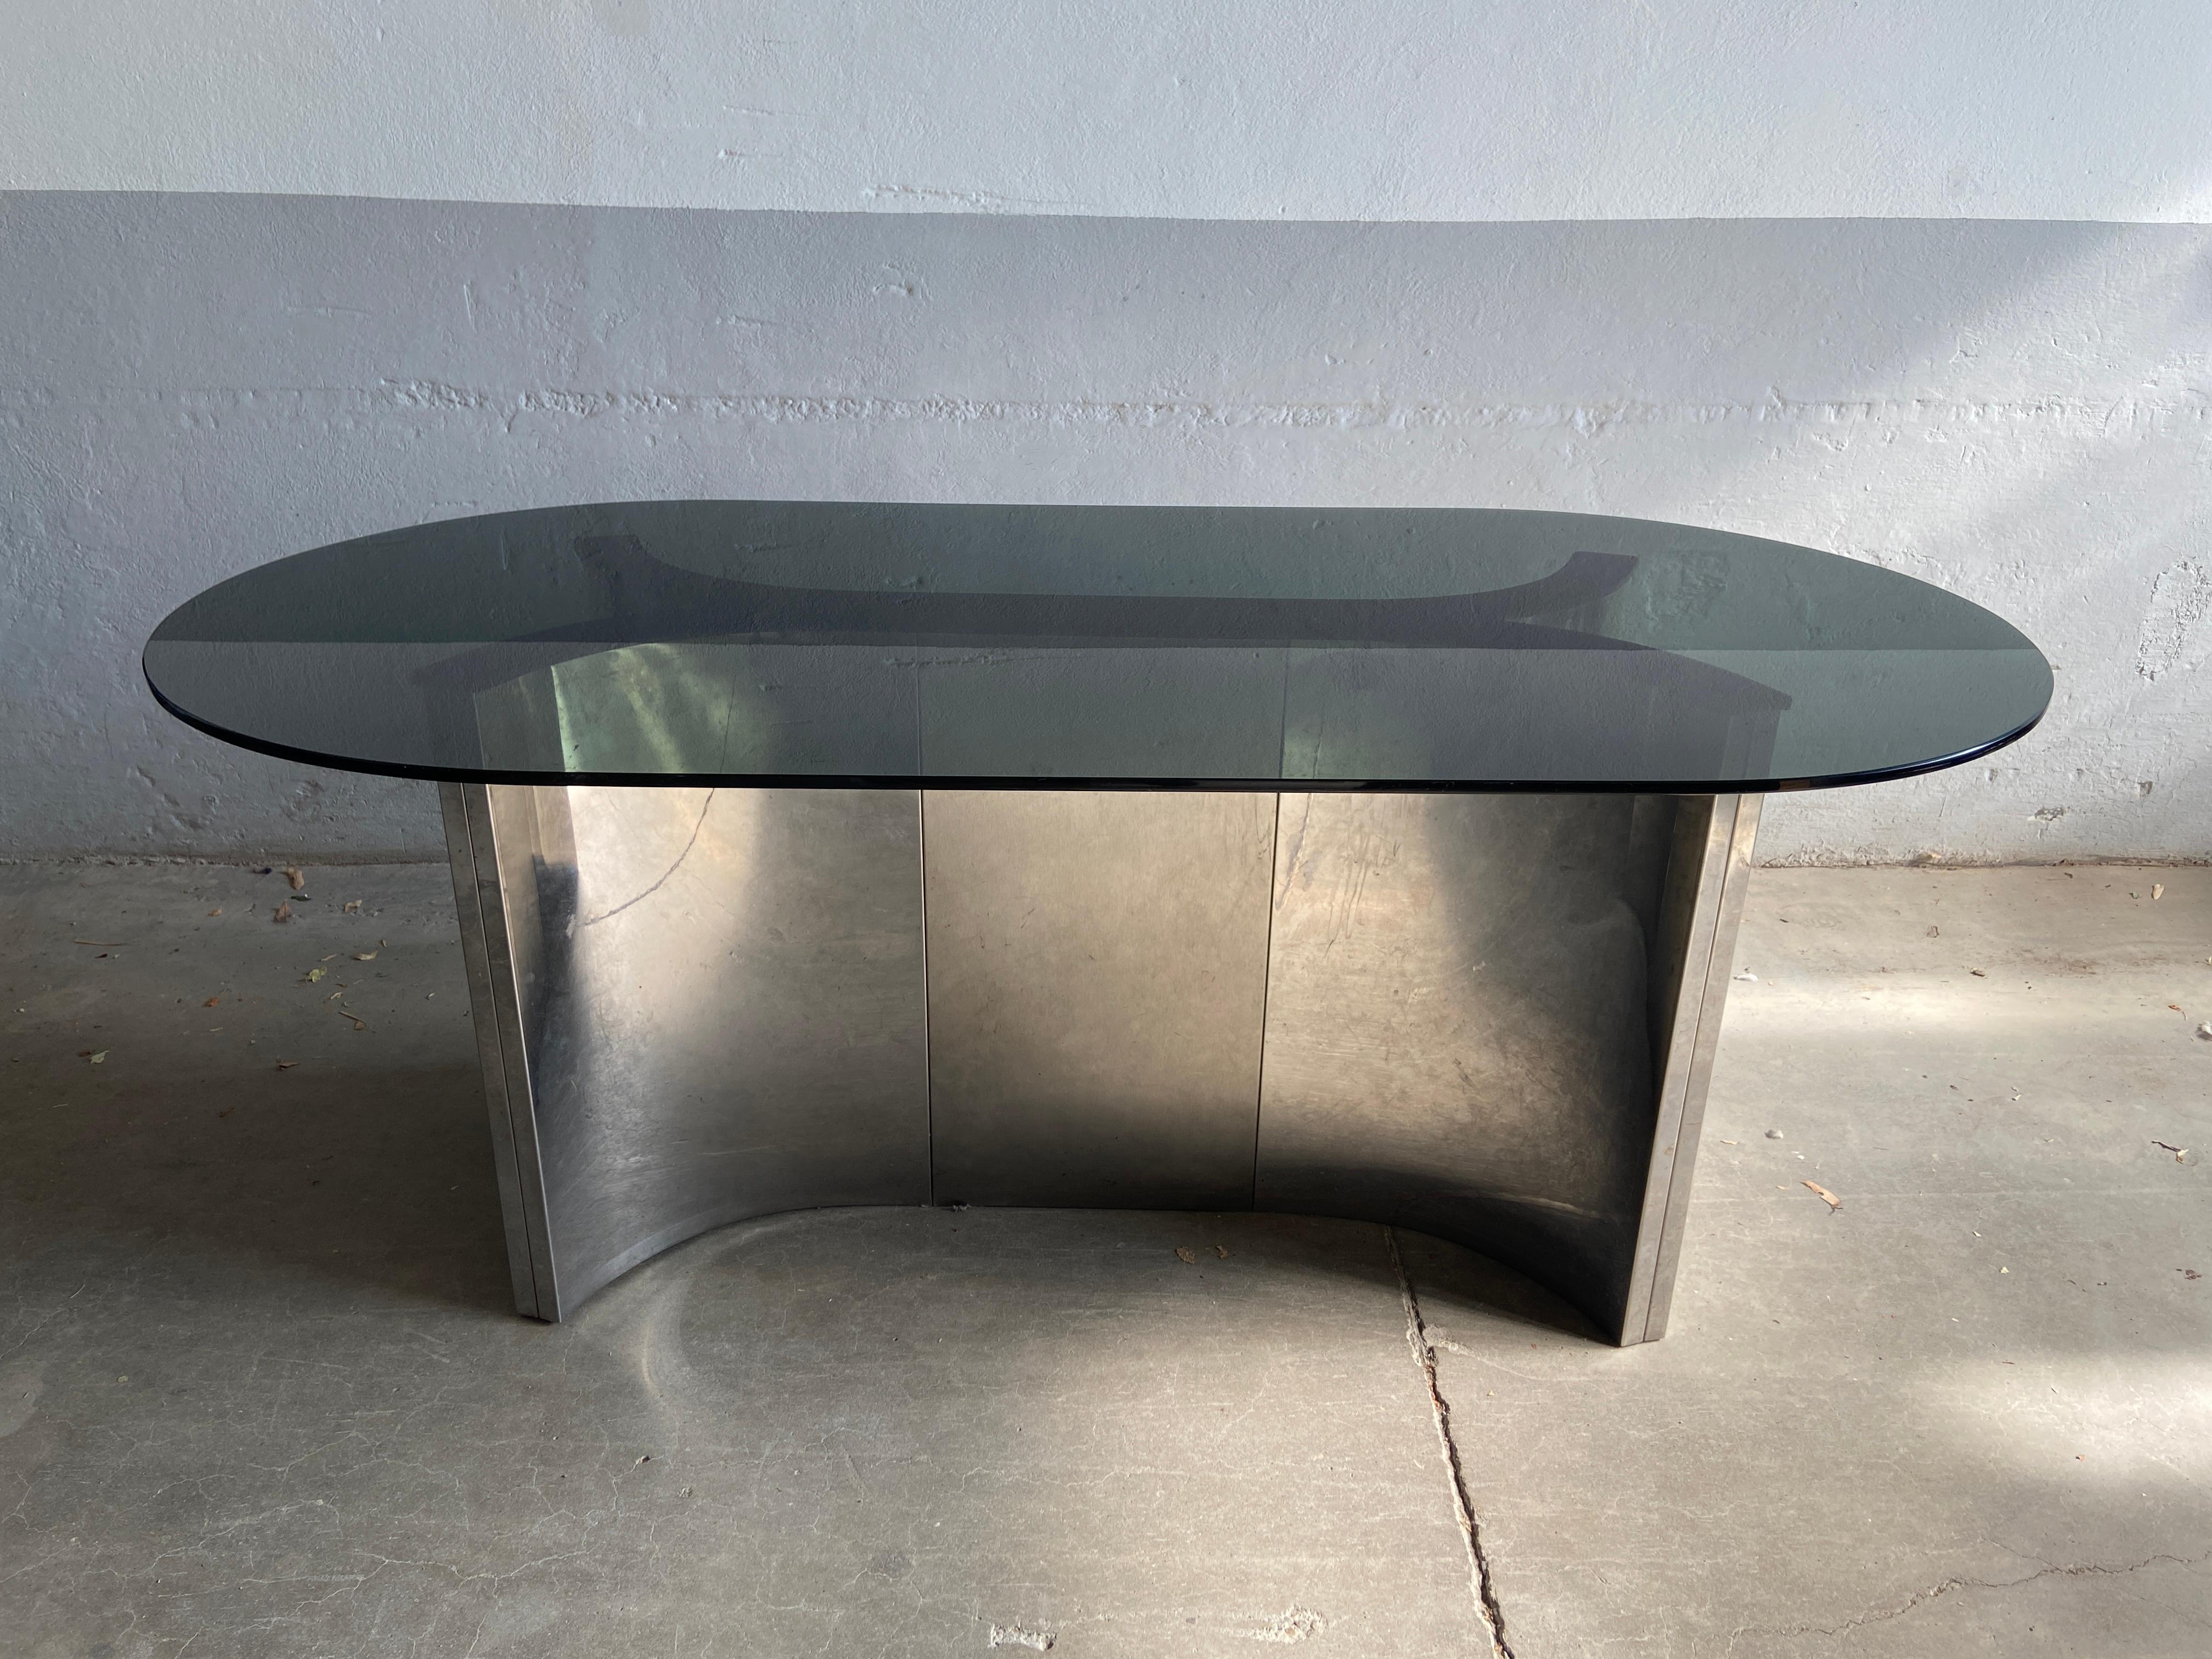 Late 20th Century Mid-Century Modern Italian Dining Stainless Steel Table with Smoked Glass Top